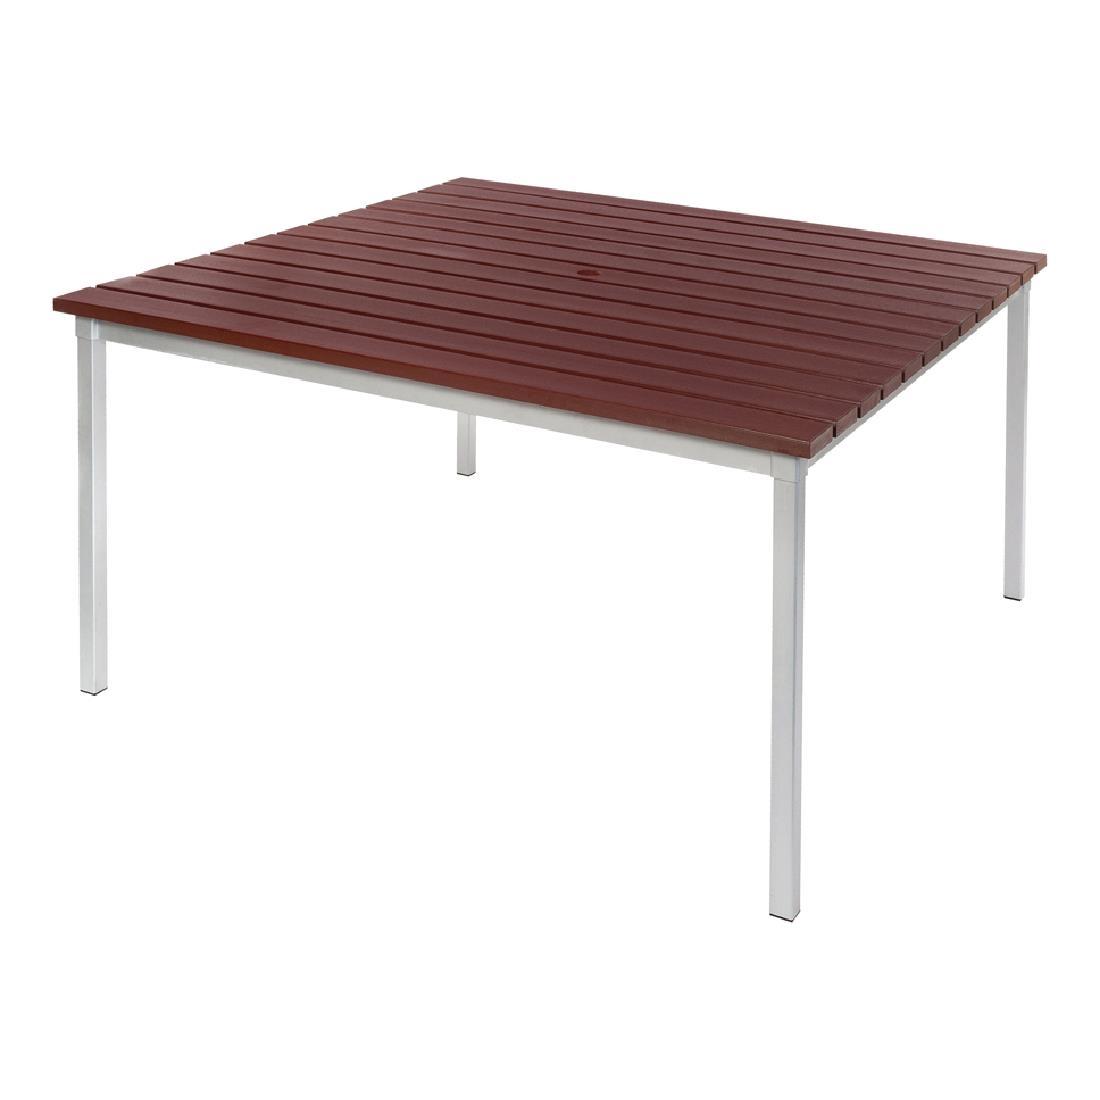 Enviro Square Outdoor Walnut Effect Faux Wood Table 1250mm - CK811  - 1